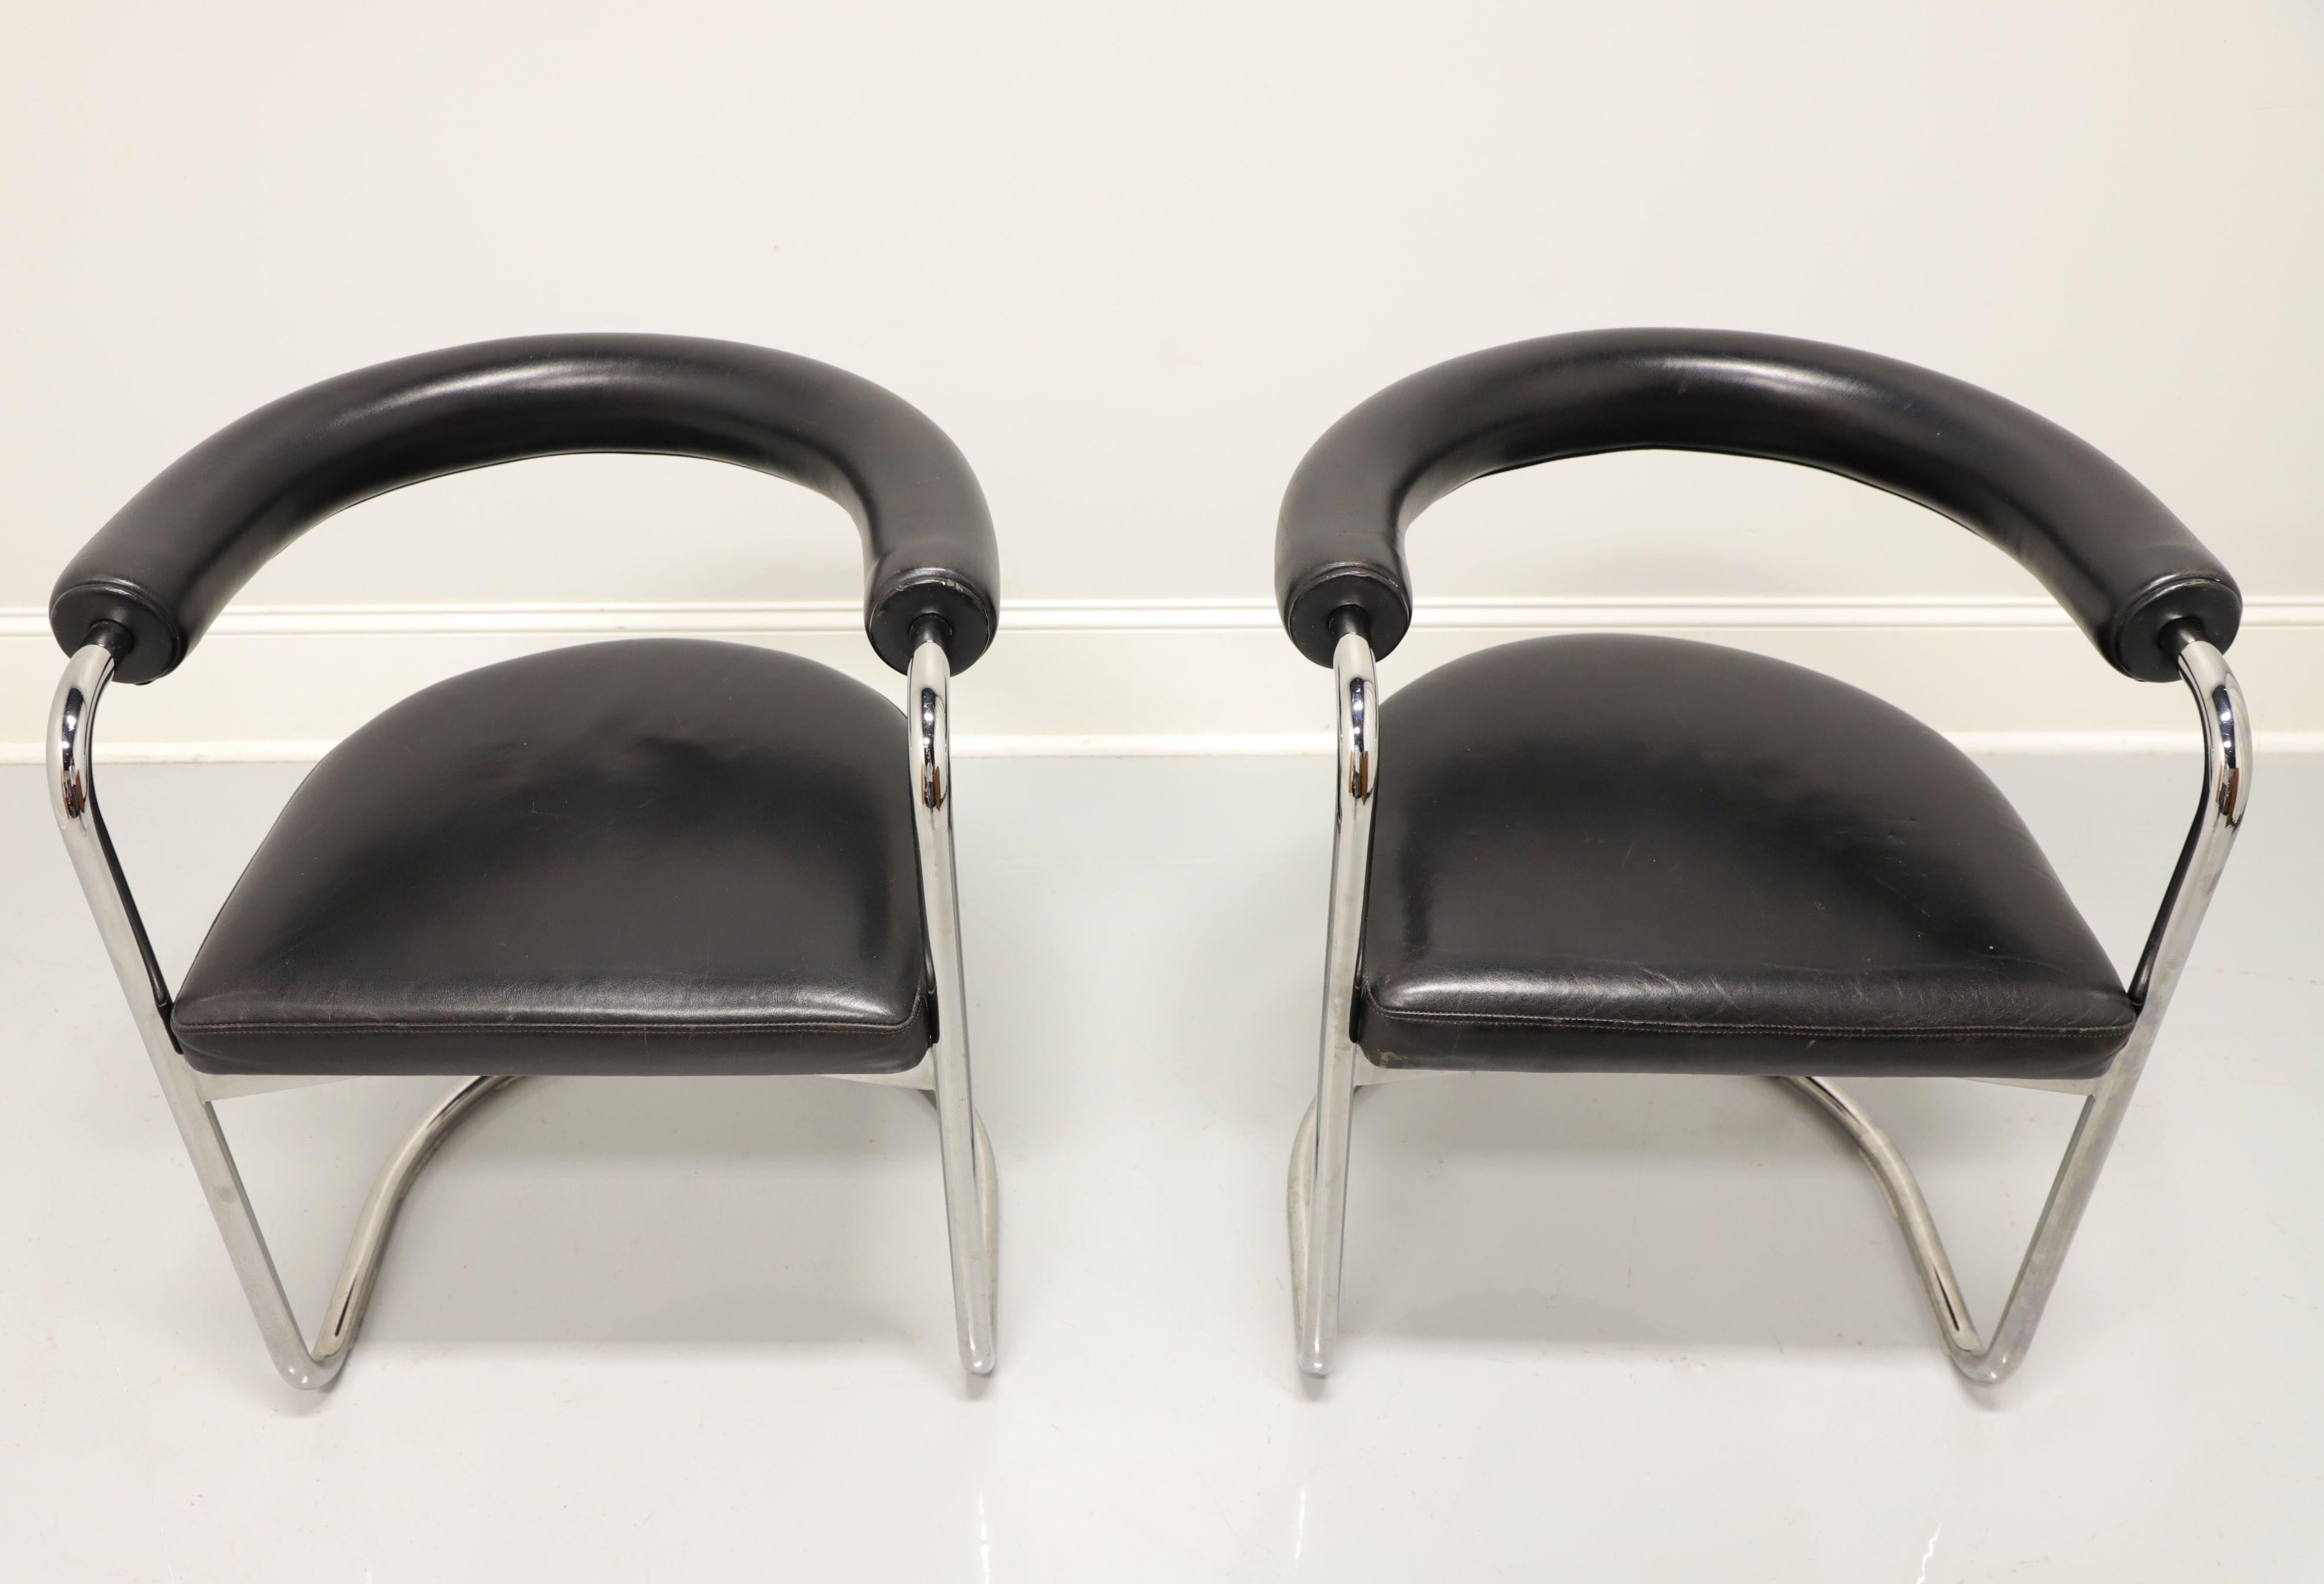 A pair of vintage Contemporary style cantilever chairs by Stendig, of New York, USA. Tubular steel frame, barrel back design, rolled upholstered black leather backs forming into the arms and black leather upholstered seats. Made in the late 20th